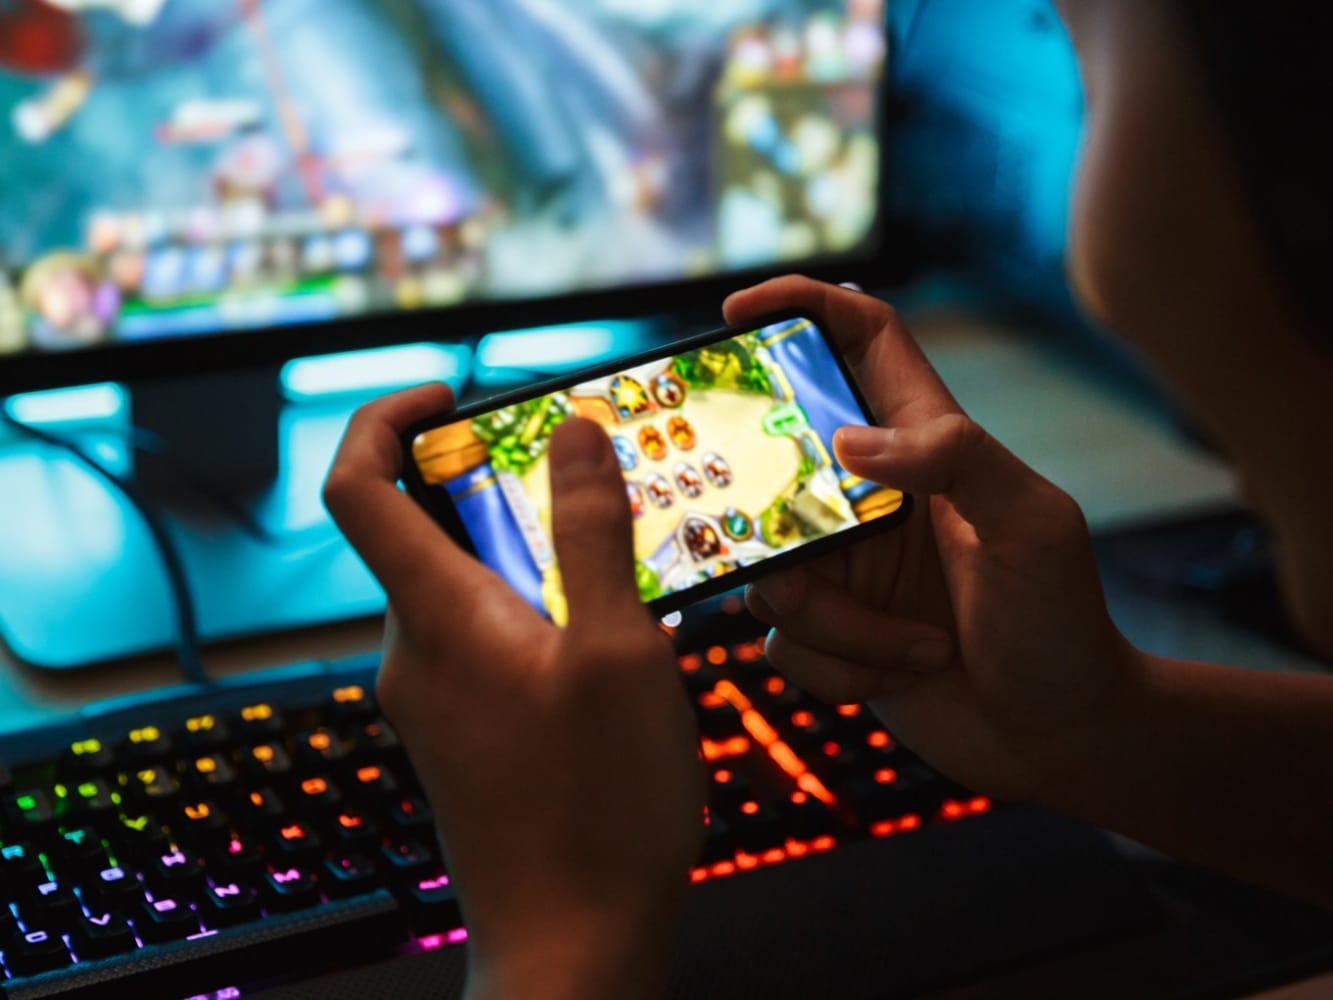 Top 10 cross-play games to play with friends and family remotely